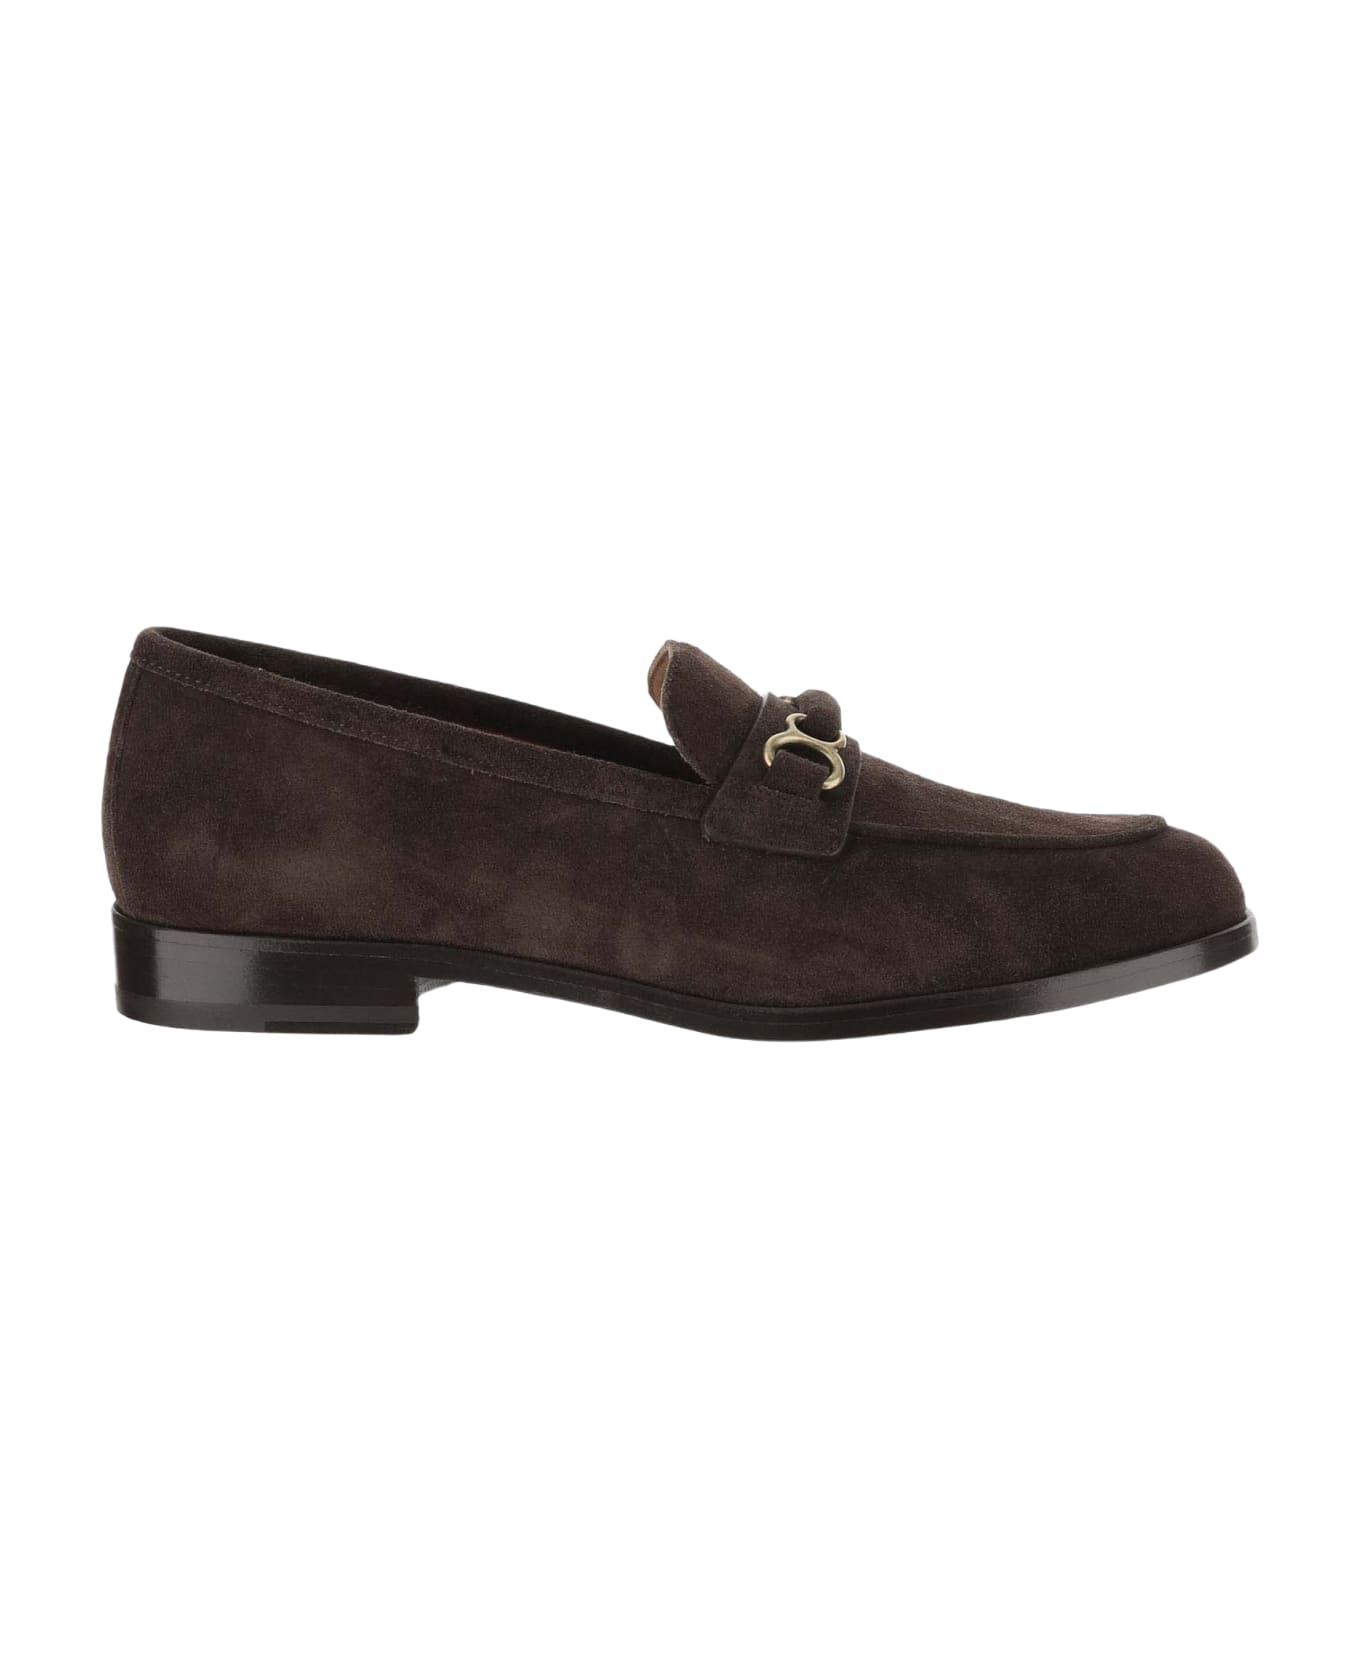 Sartore Suede Loafers - Brown